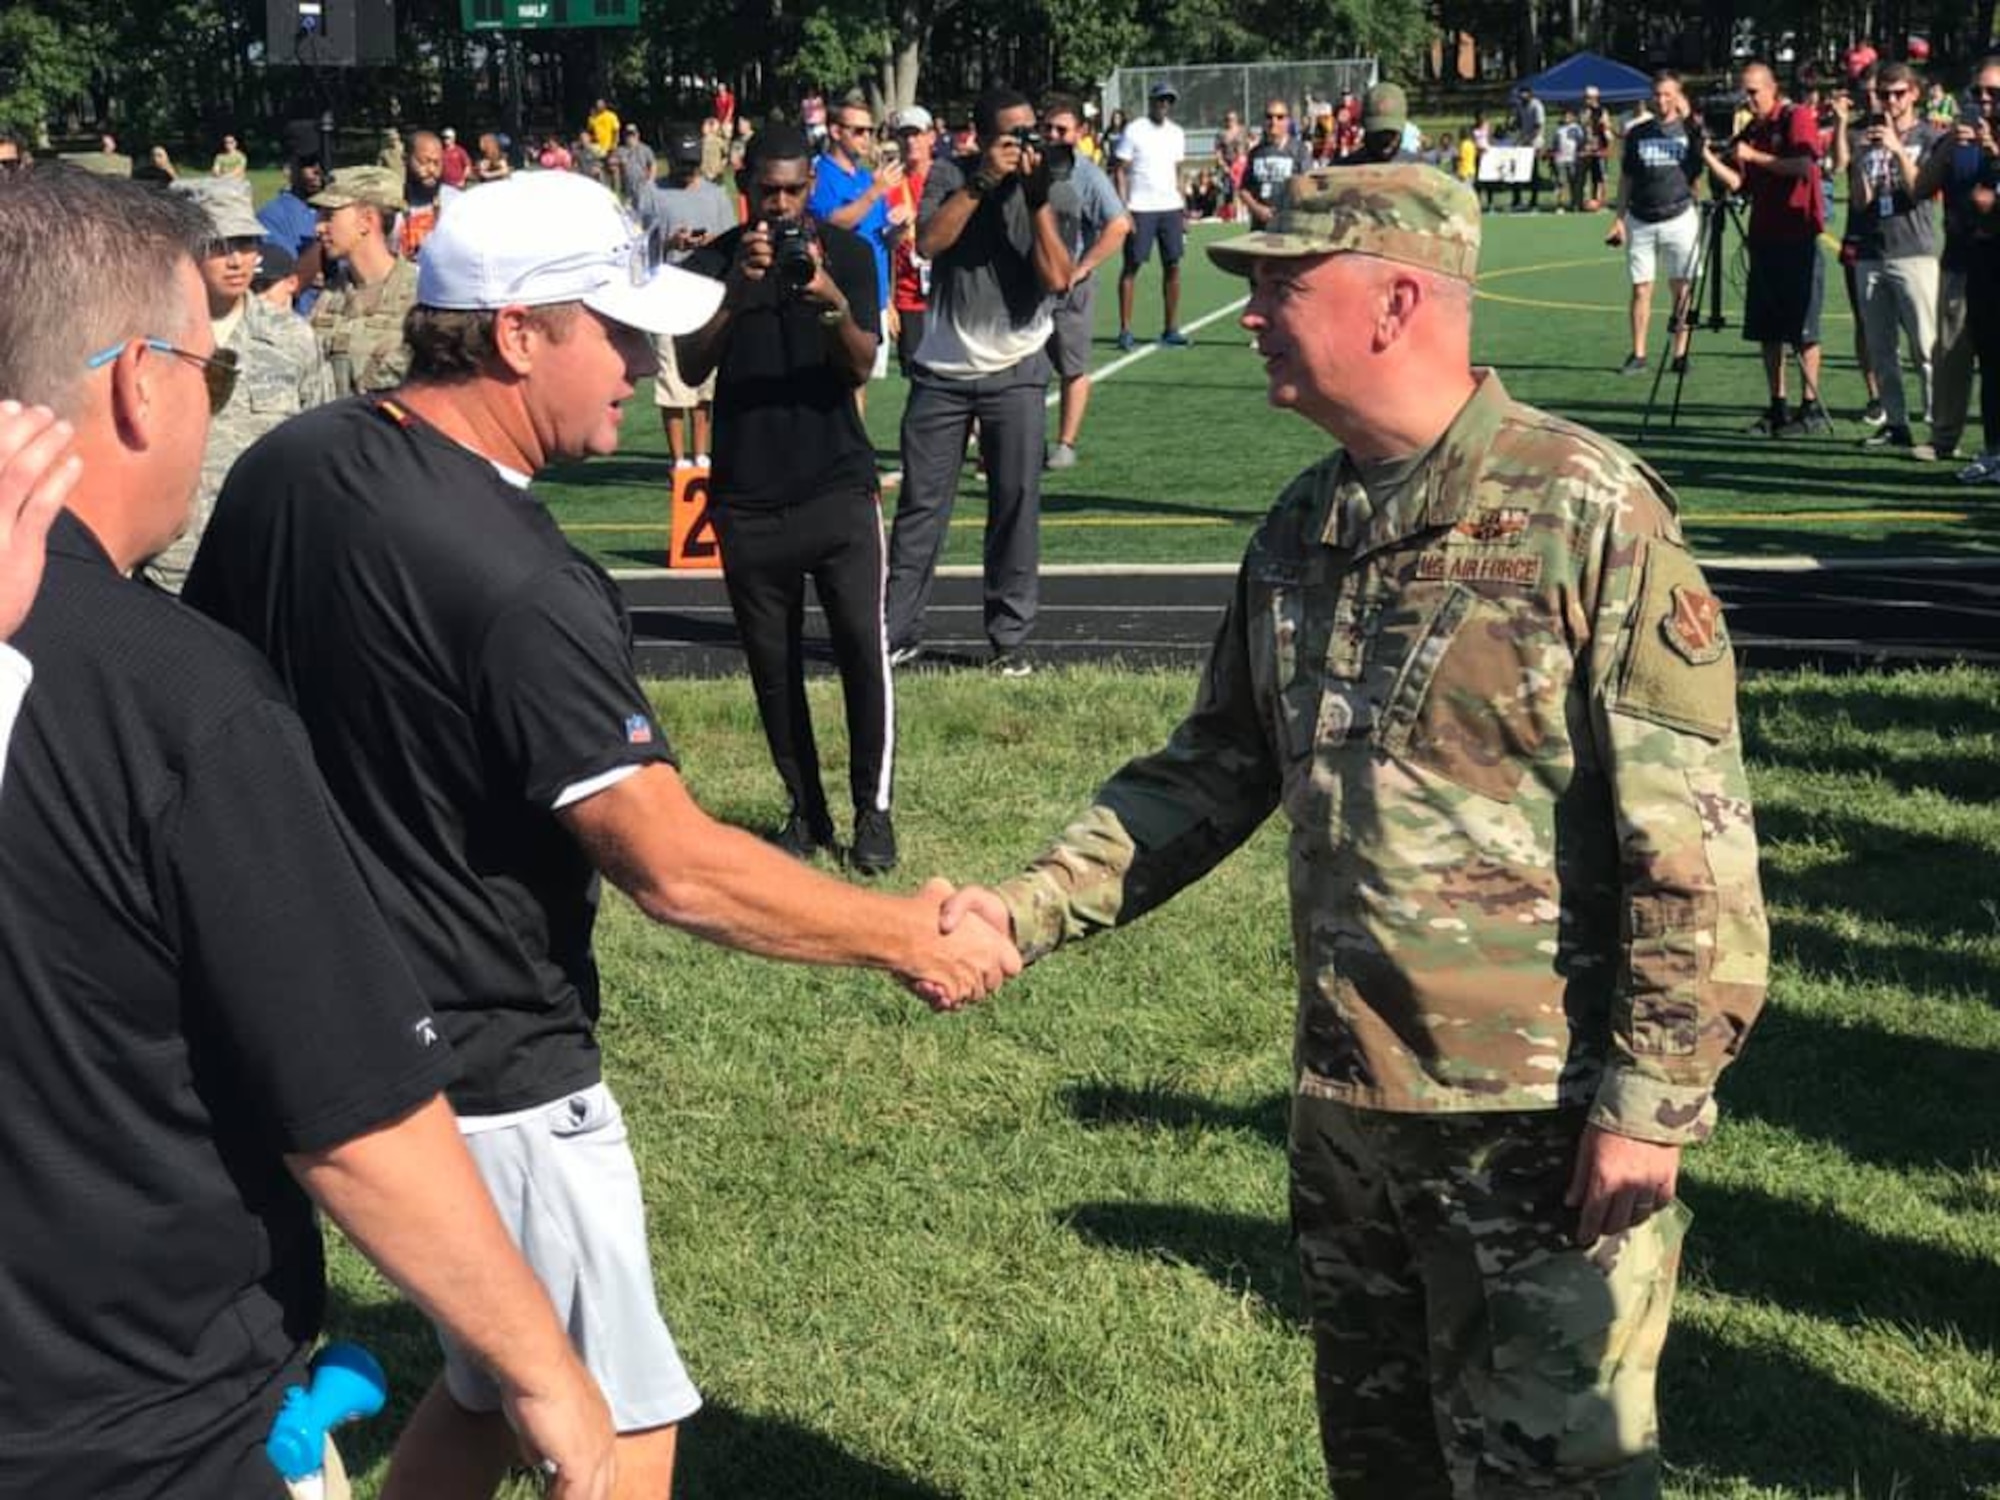 Air Force District of Washington Commander Maj. Gen. Ricky N. Rupp shakes hands with Washington Redskins head coach Jay Gruden during the team's walkthough practice here at Joint Base Andrews Aug. 14. The event is part of the NFL team's ongoingRedskins Salutes efforts presented by USAA. (U.S. Air Force/Lt. Col. John Ross)